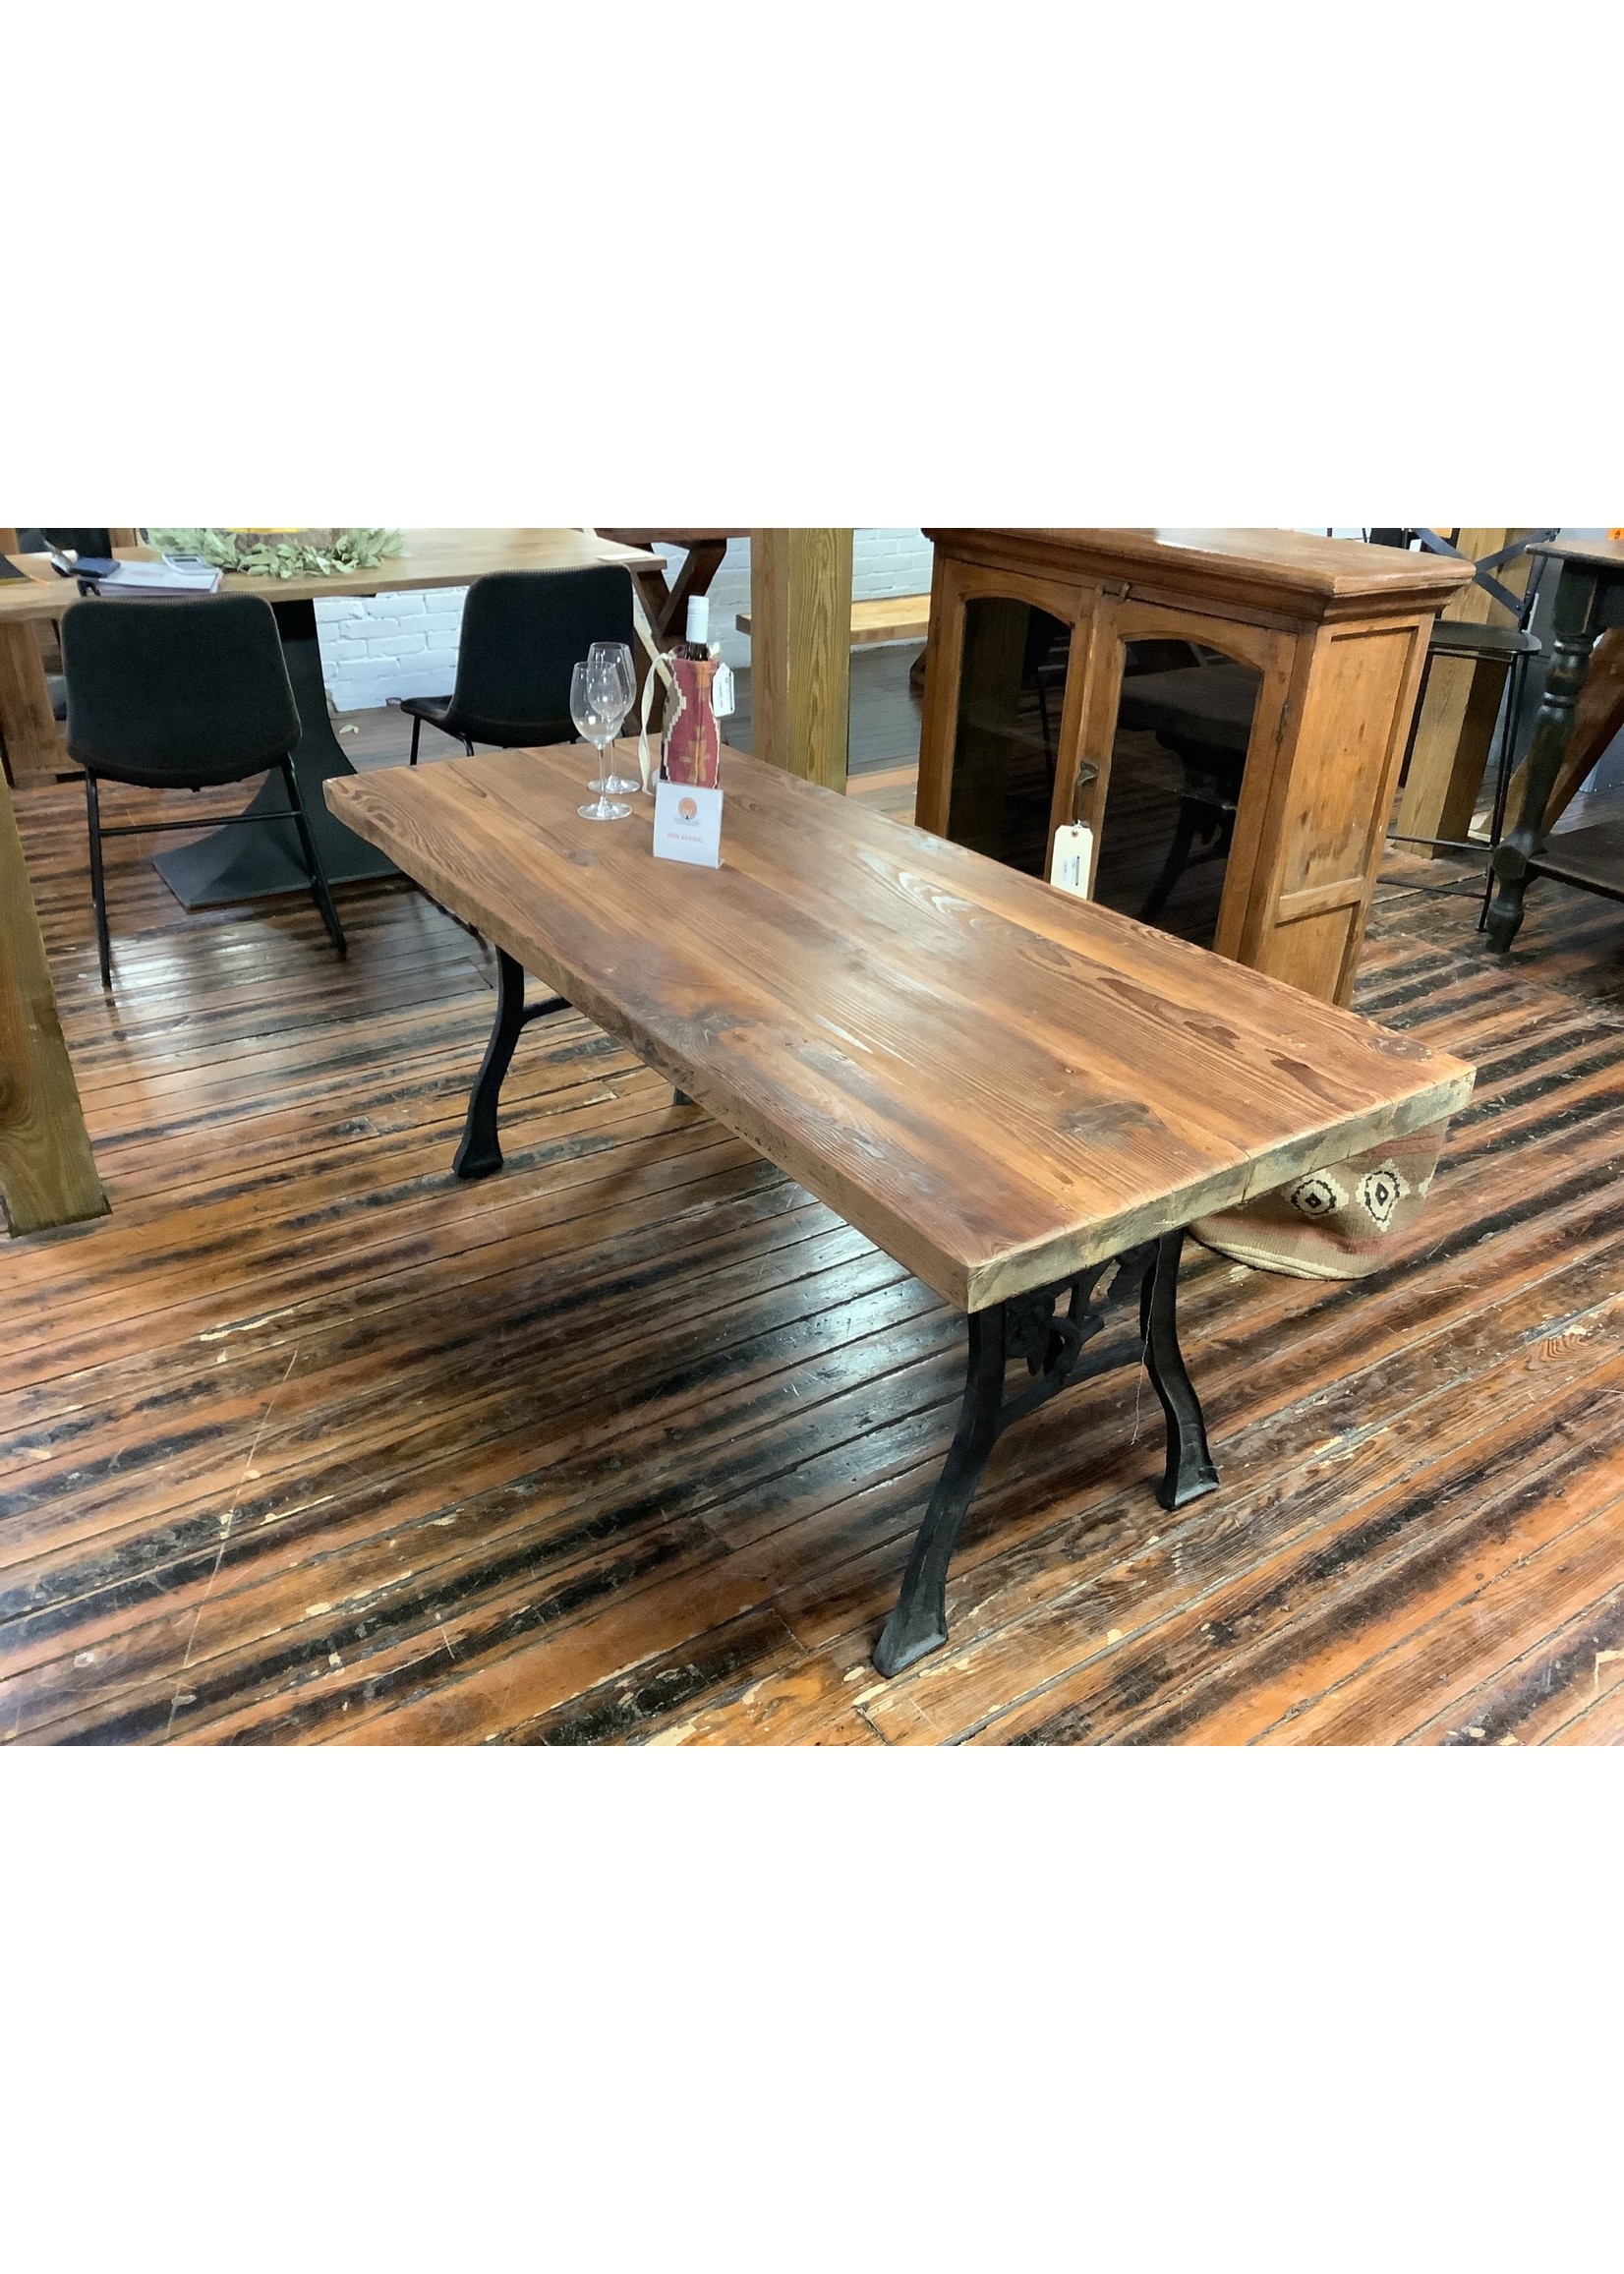 OW GARAGE SALE Rustic Heart Pine Table Metal Floral Base 24.75” x 54.25” x 28”